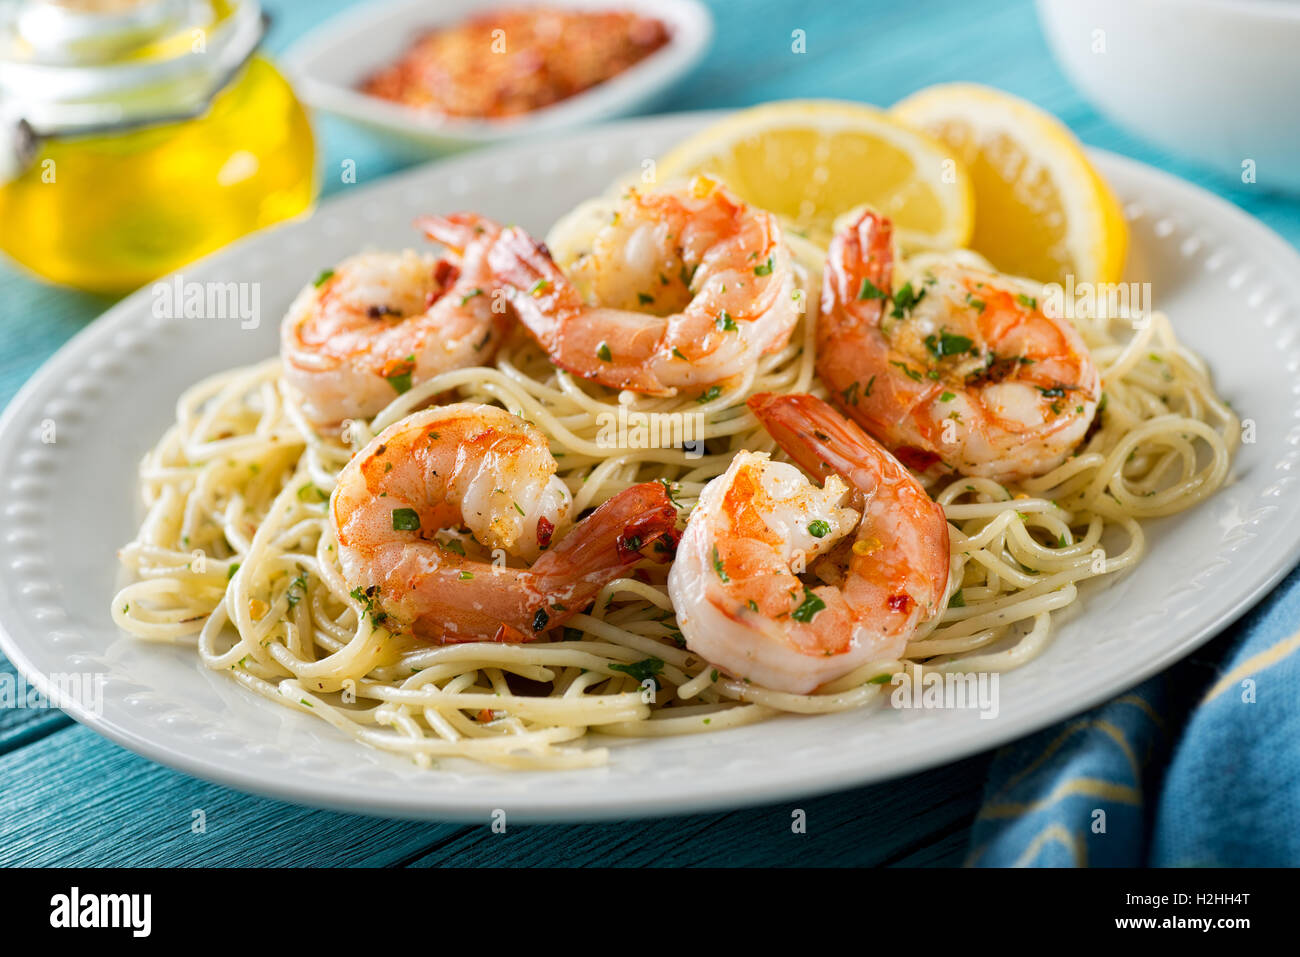 A delicious plate of shrimp scampi with spaghetti and lemon. Stock Photo